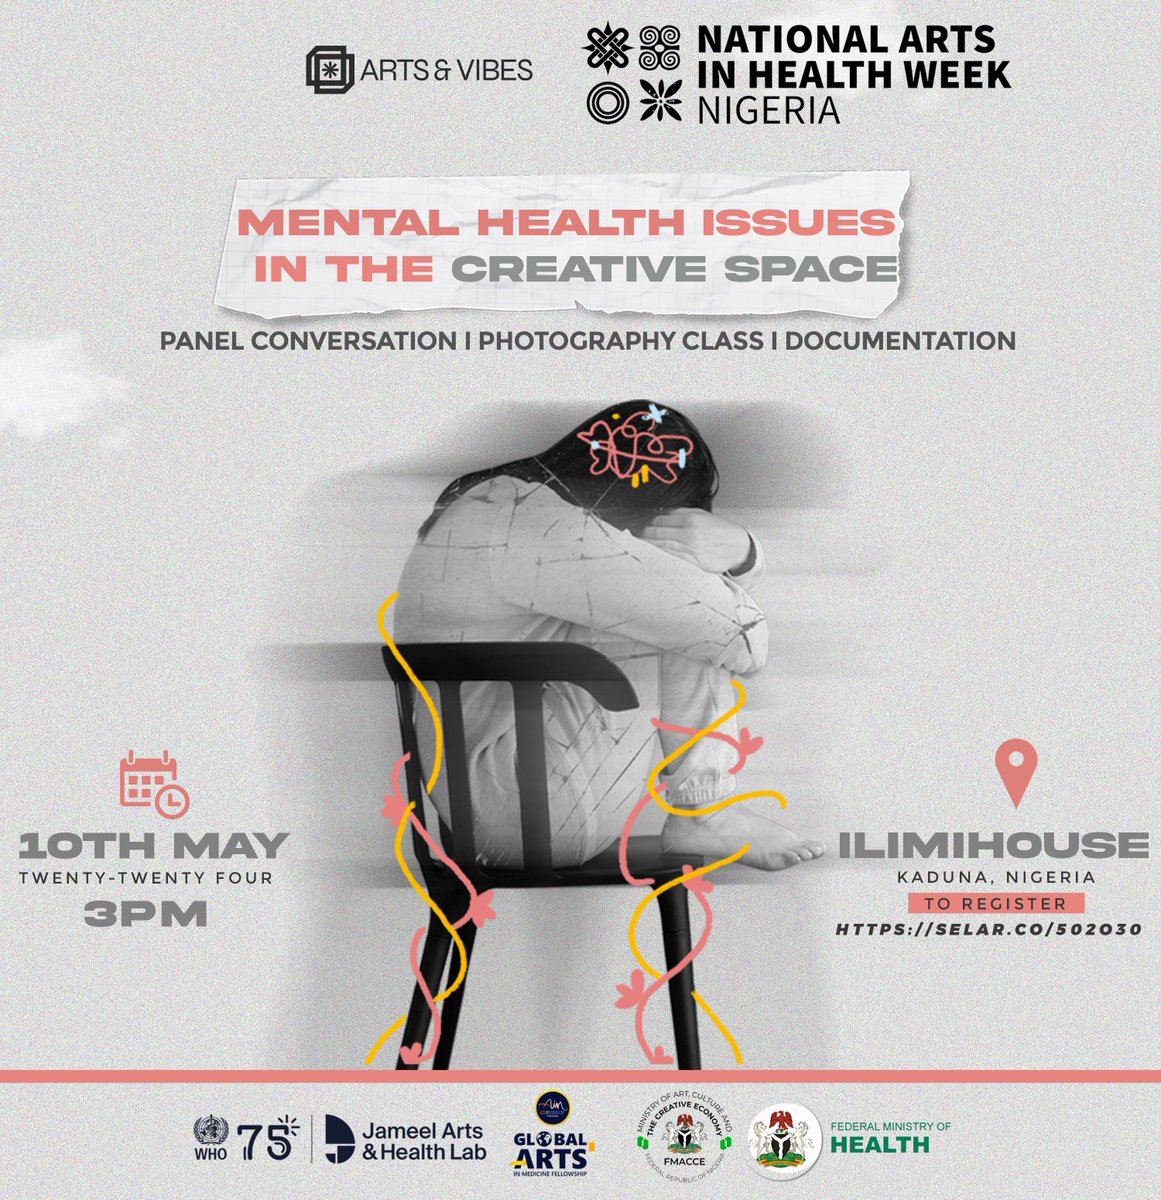 On the 10th of May, Arts and Vibes in collaboration with NAHW ( @NahweekNg) are curating something special for you. 

There will be a photography class and a panel conversation on mental health issues in the creative space. 

Registeration is free: selar.co/502o30